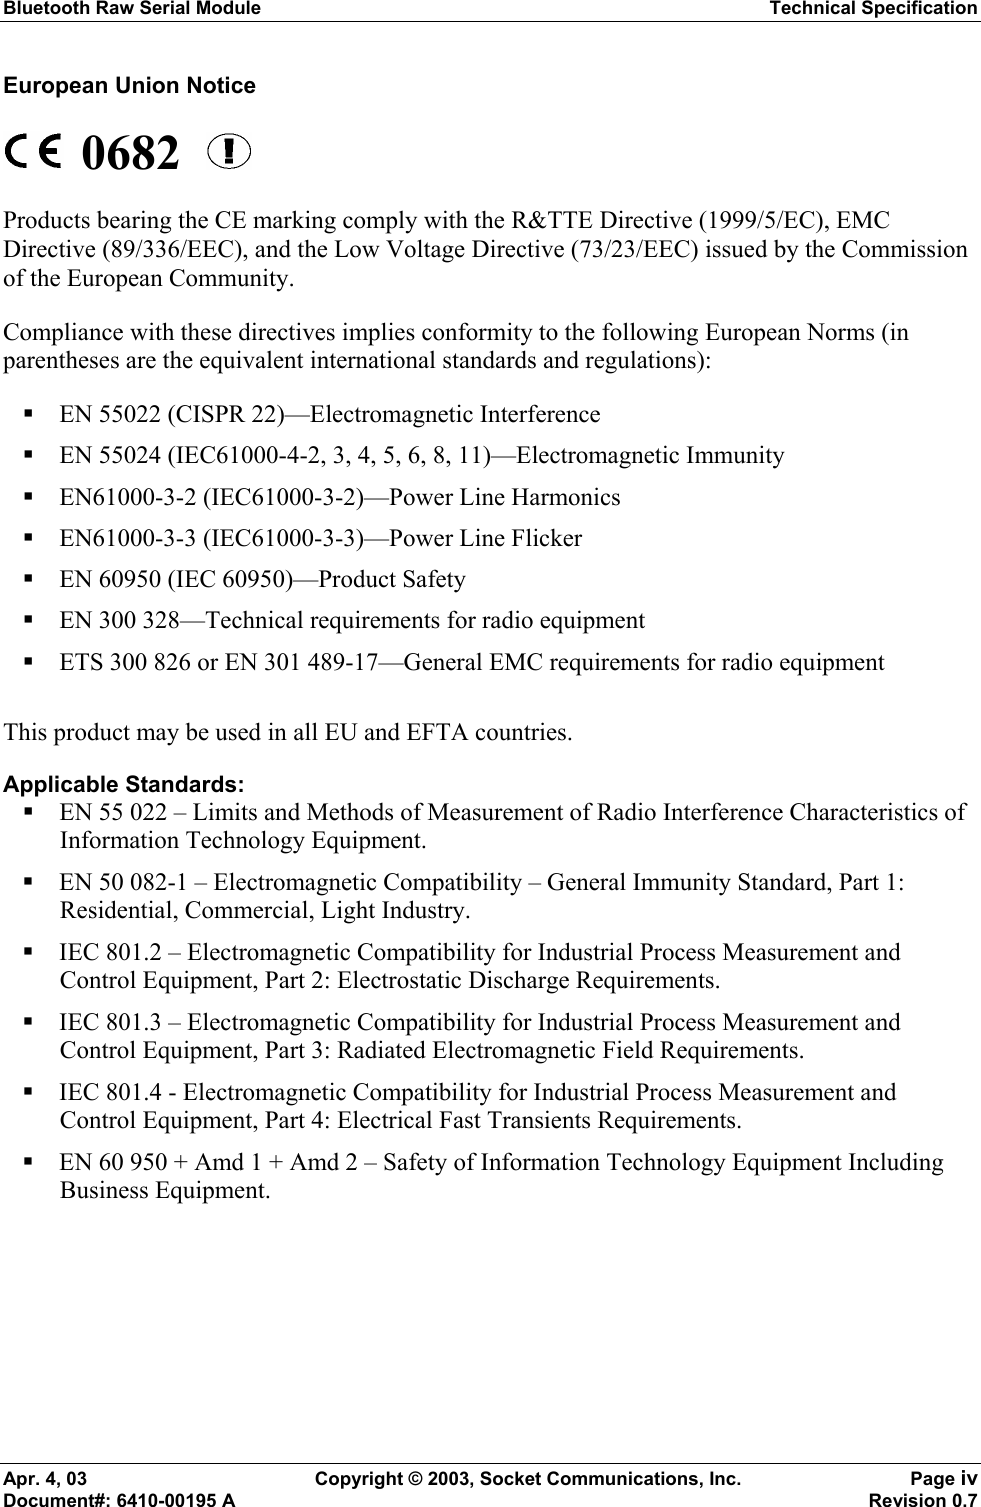 Bluetooth Raw Serial Module Technical Specification Apr. 4, 03  Copyright © 2003, Socket Communications, Inc.  Page iv Document#: 6410-00195 A    Revision 0.7 European Union Notice  0682    Products bearing the CE marking comply with the R&amp;TTE Directive (1999/5/EC), EMC Directive (89/336/EEC), and the Low Voltage Directive (73/23/EEC) issued by the Commission of the European Community. Compliance with these directives implies conformity to the following European Norms (in parentheses are the equivalent international standards and regulations):  EN 55022 (CISPR 22)—Electromagnetic Interference  EN 55024 (IEC61000-4-2, 3, 4, 5, 6, 8, 11)—Electromagnetic Immunity  EN61000-3-2 (IEC61000-3-2)—Power Line Harmonics  EN61000-3-3 (IEC61000-3-3)—Power Line Flicker  EN 60950 (IEC 60950)—Product Safety  EN 300 328—Technical requirements for radio equipment  ETS 300 826 or EN 301 489-17—General EMC requirements for radio equipment  This product may be used in all EU and EFTA countries. Applicable Standards:  EN 55 022 – Limits and Methods of Measurement of Radio Interference Characteristics of Information Technology Equipment.  EN 50 082-1 – Electromagnetic Compatibility – General Immunity Standard, Part 1: Residential, Commercial, Light Industry.  IEC 801.2 – Electromagnetic Compatibility for Industrial Process Measurement and Control Equipment, Part 2: Electrostatic Discharge Requirements.  IEC 801.3 – Electromagnetic Compatibility for Industrial Process Measurement and Control Equipment, Part 3: Radiated Electromagnetic Field Requirements.  IEC 801.4 - Electromagnetic Compatibility for Industrial Process Measurement and Control Equipment, Part 4: Electrical Fast Transients Requirements.  EN 60 950 + Amd 1 + Amd 2 – Safety of Information Technology Equipment Including Business Equipment.  